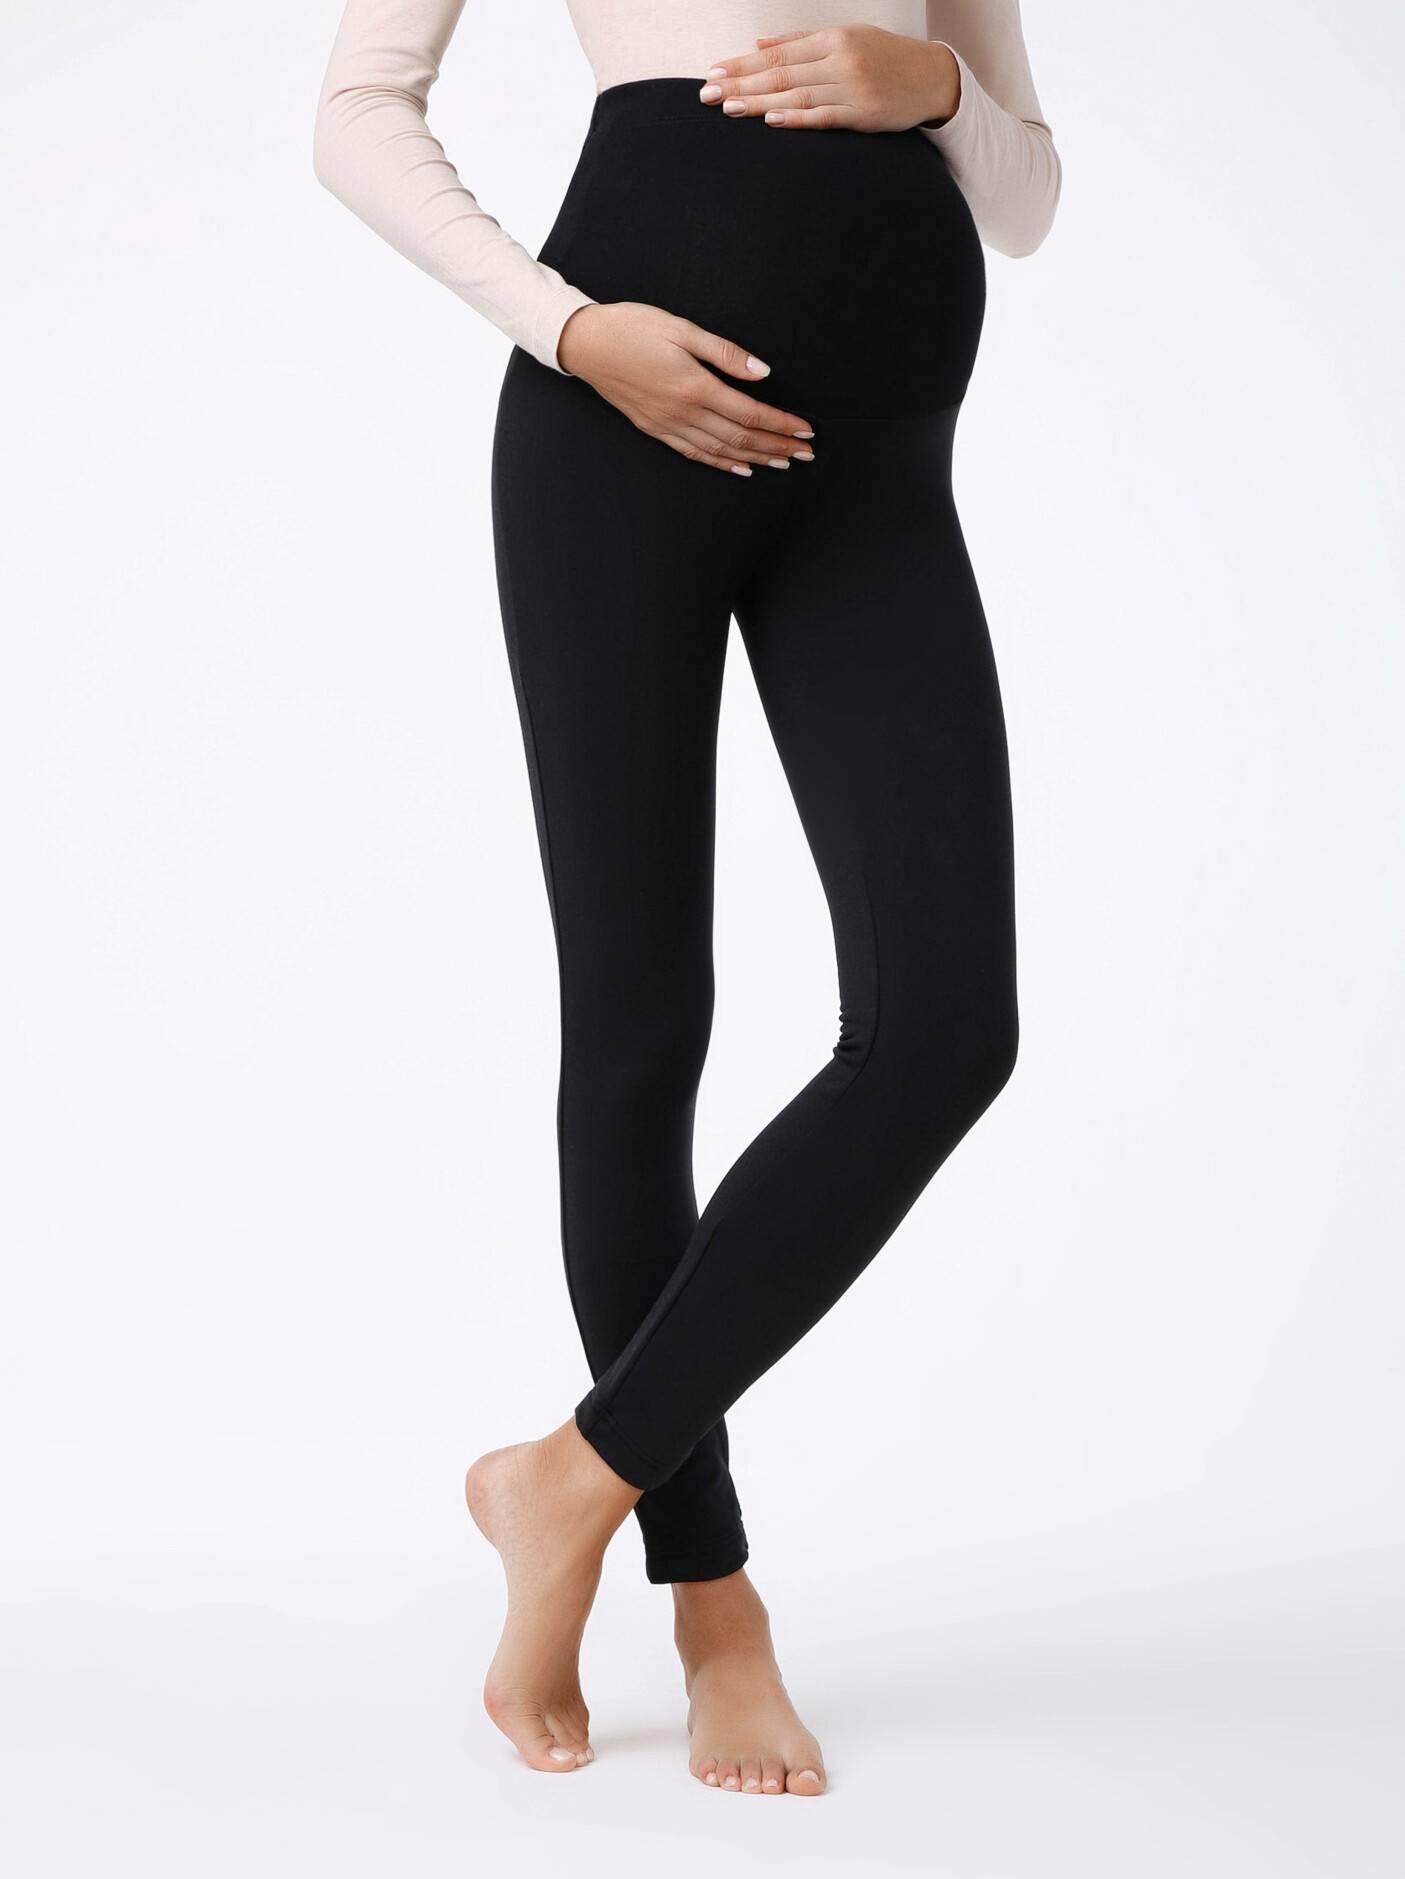 Extra soft leggings for pregnant women with a high fit and thermal ...